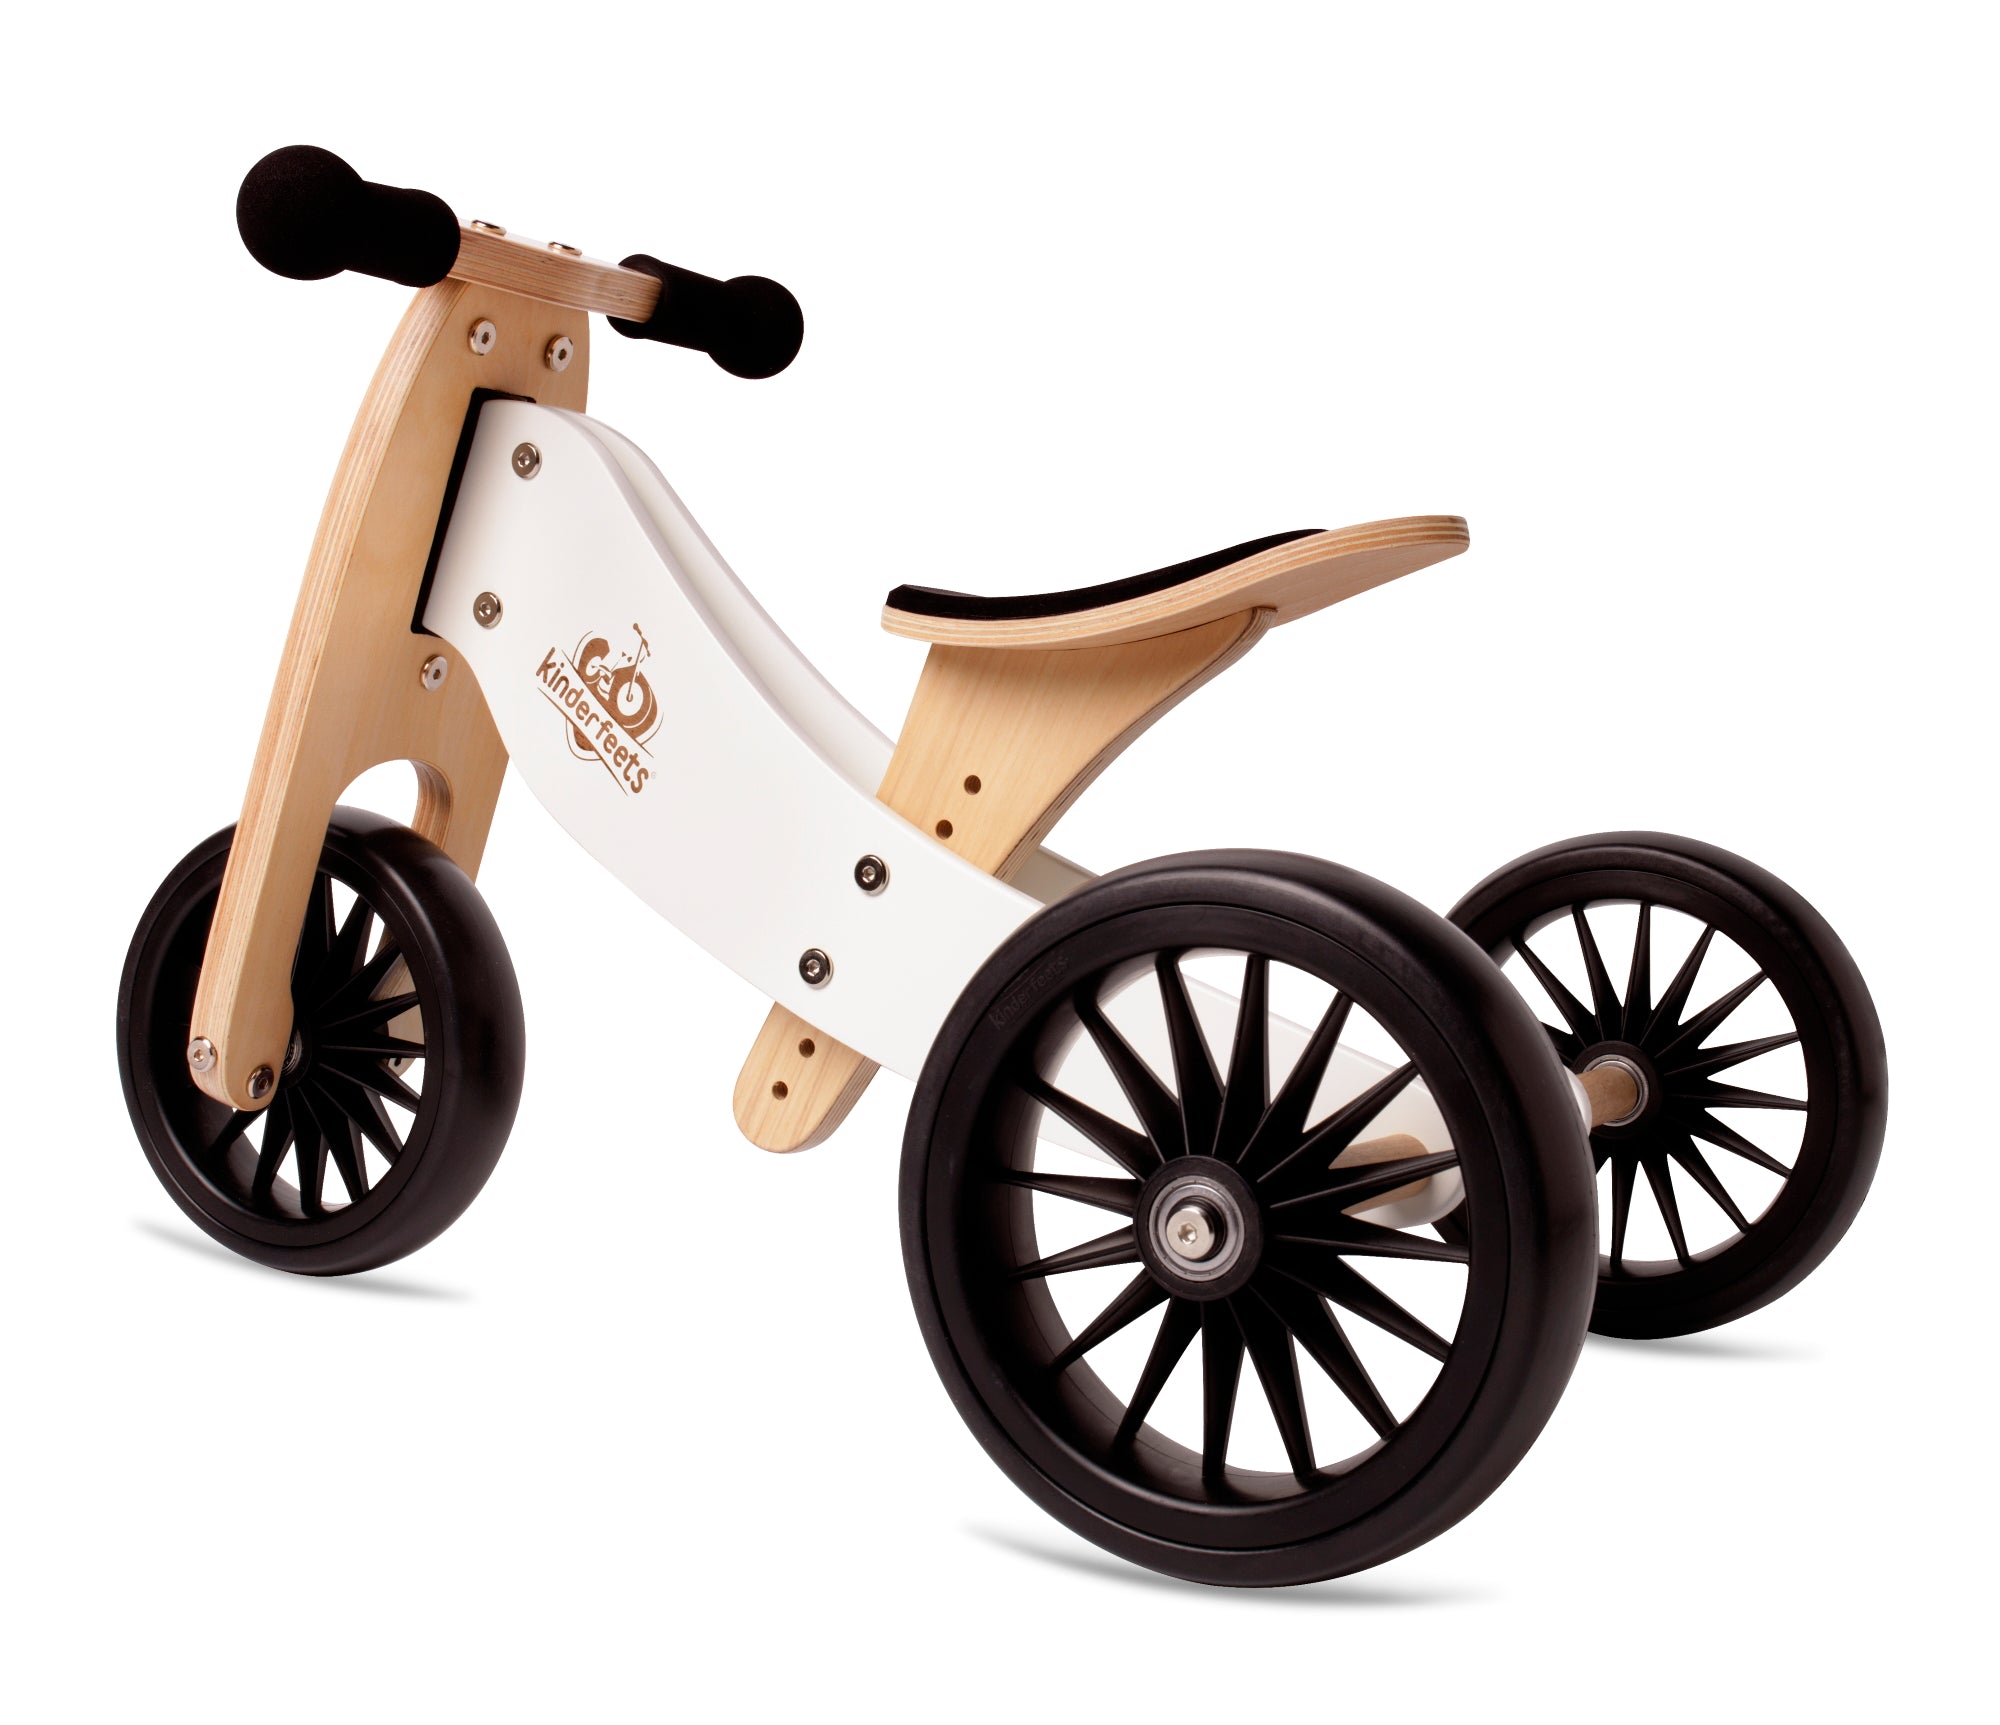 Kinderfeets Tiny Tot Plus tricycle balance bike wooden training bike running bike no pedals toddler children kids birch wood white and wooden crate basket